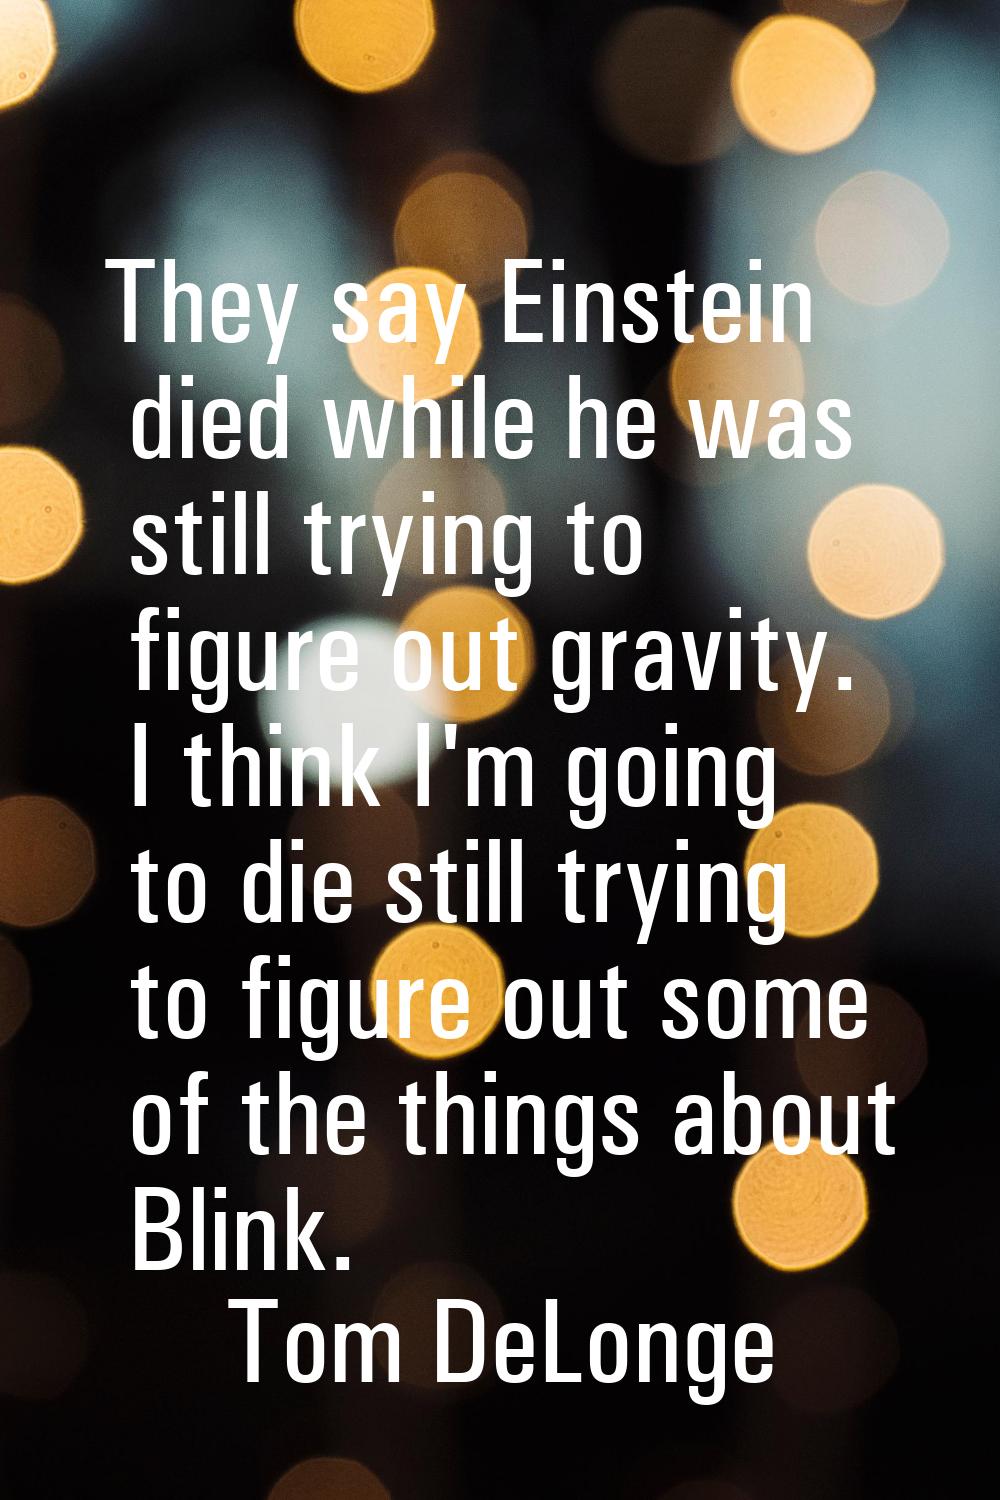 They say Einstein died while he was still trying to figure out gravity. I think I'm going to die st